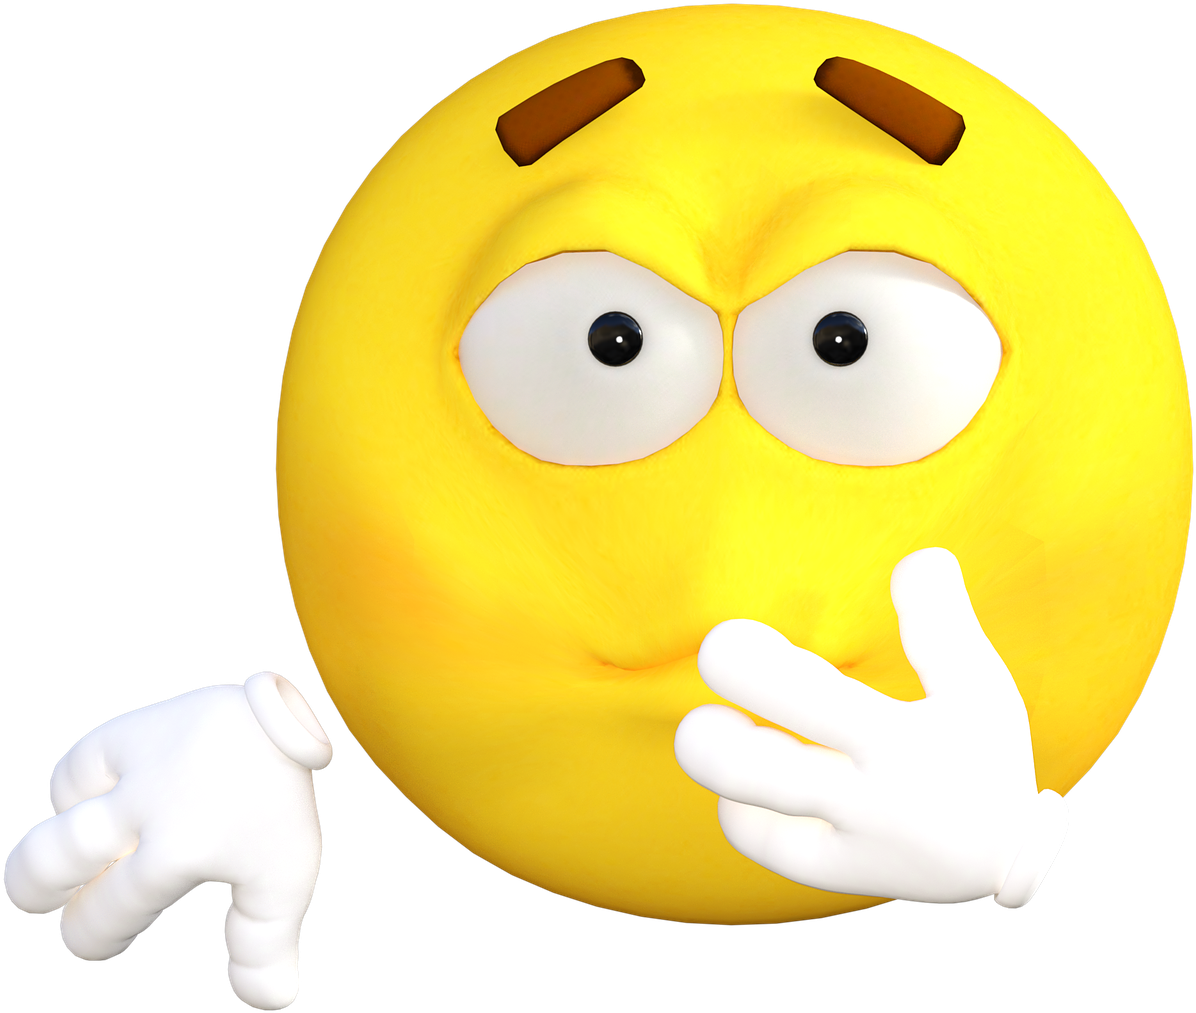 A Yellow Smiley Face With White Gloves